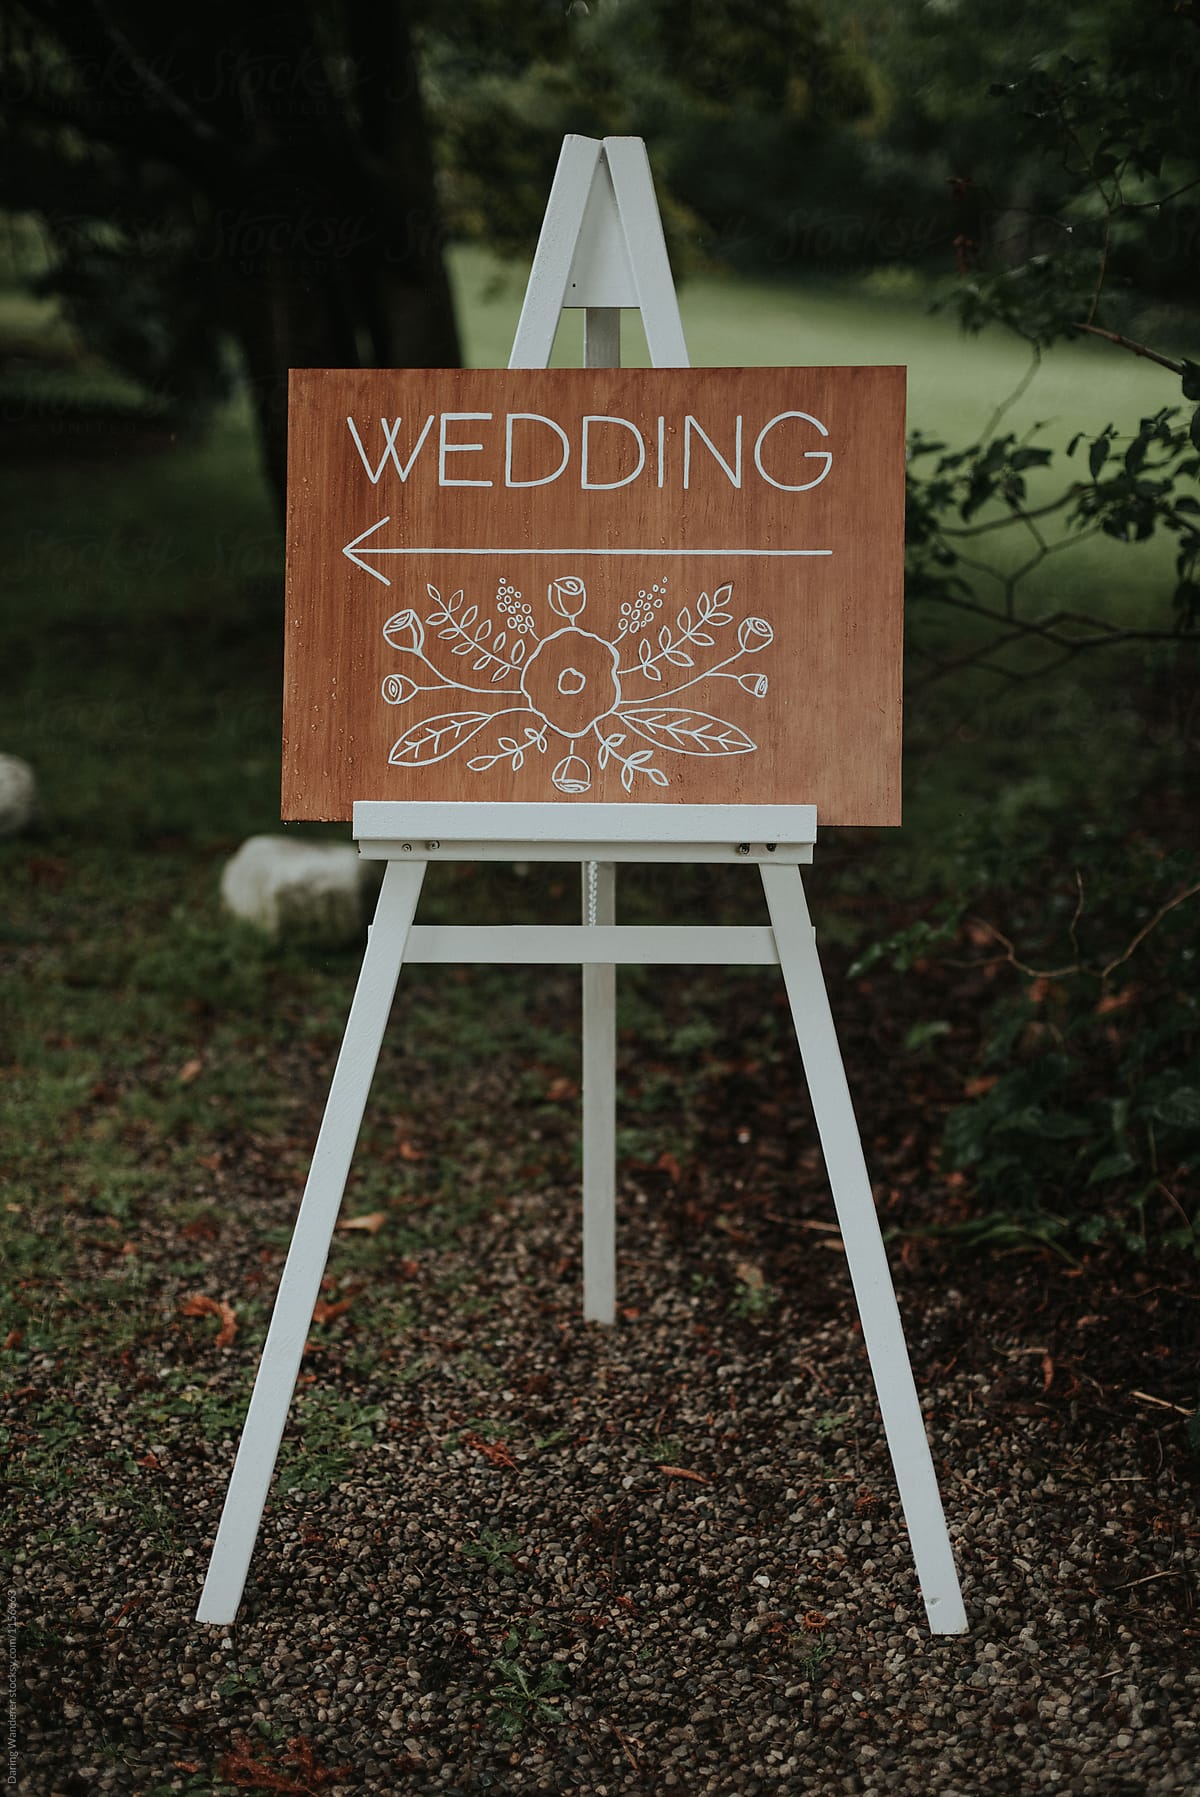 Handmade diy wedding sign with white paint on wood for outdoor wedding